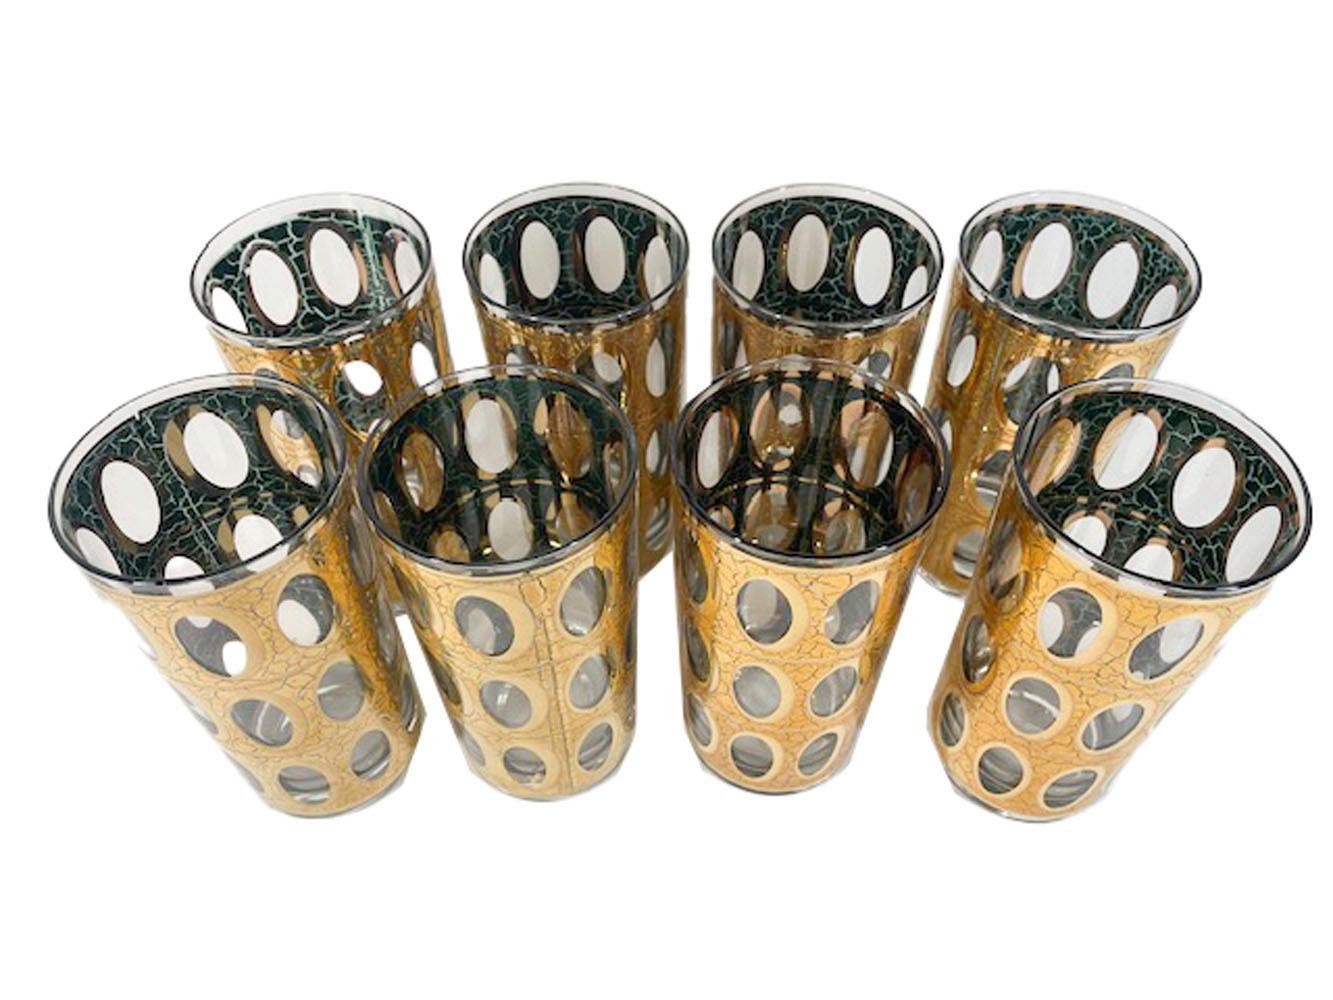 Set of 8 Mid-Century Modern highball glasses by Culver, LDT, in the Pisa pattern, decorated in crackled 22k gold over translucent green enamel with rows of open oval 'windows'.